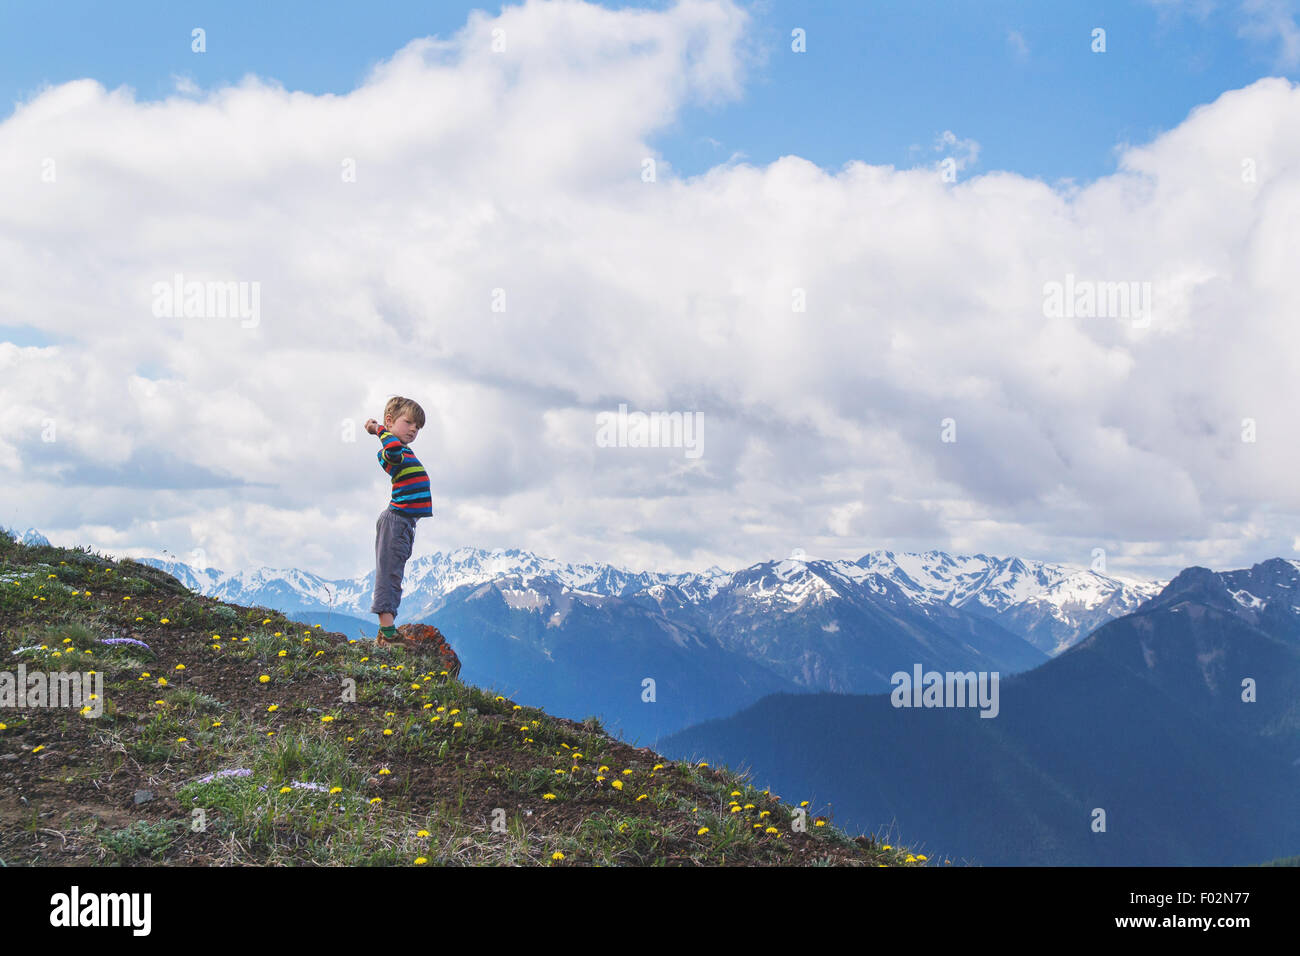 Boy standing on hill with outstretched arms Stock Photo